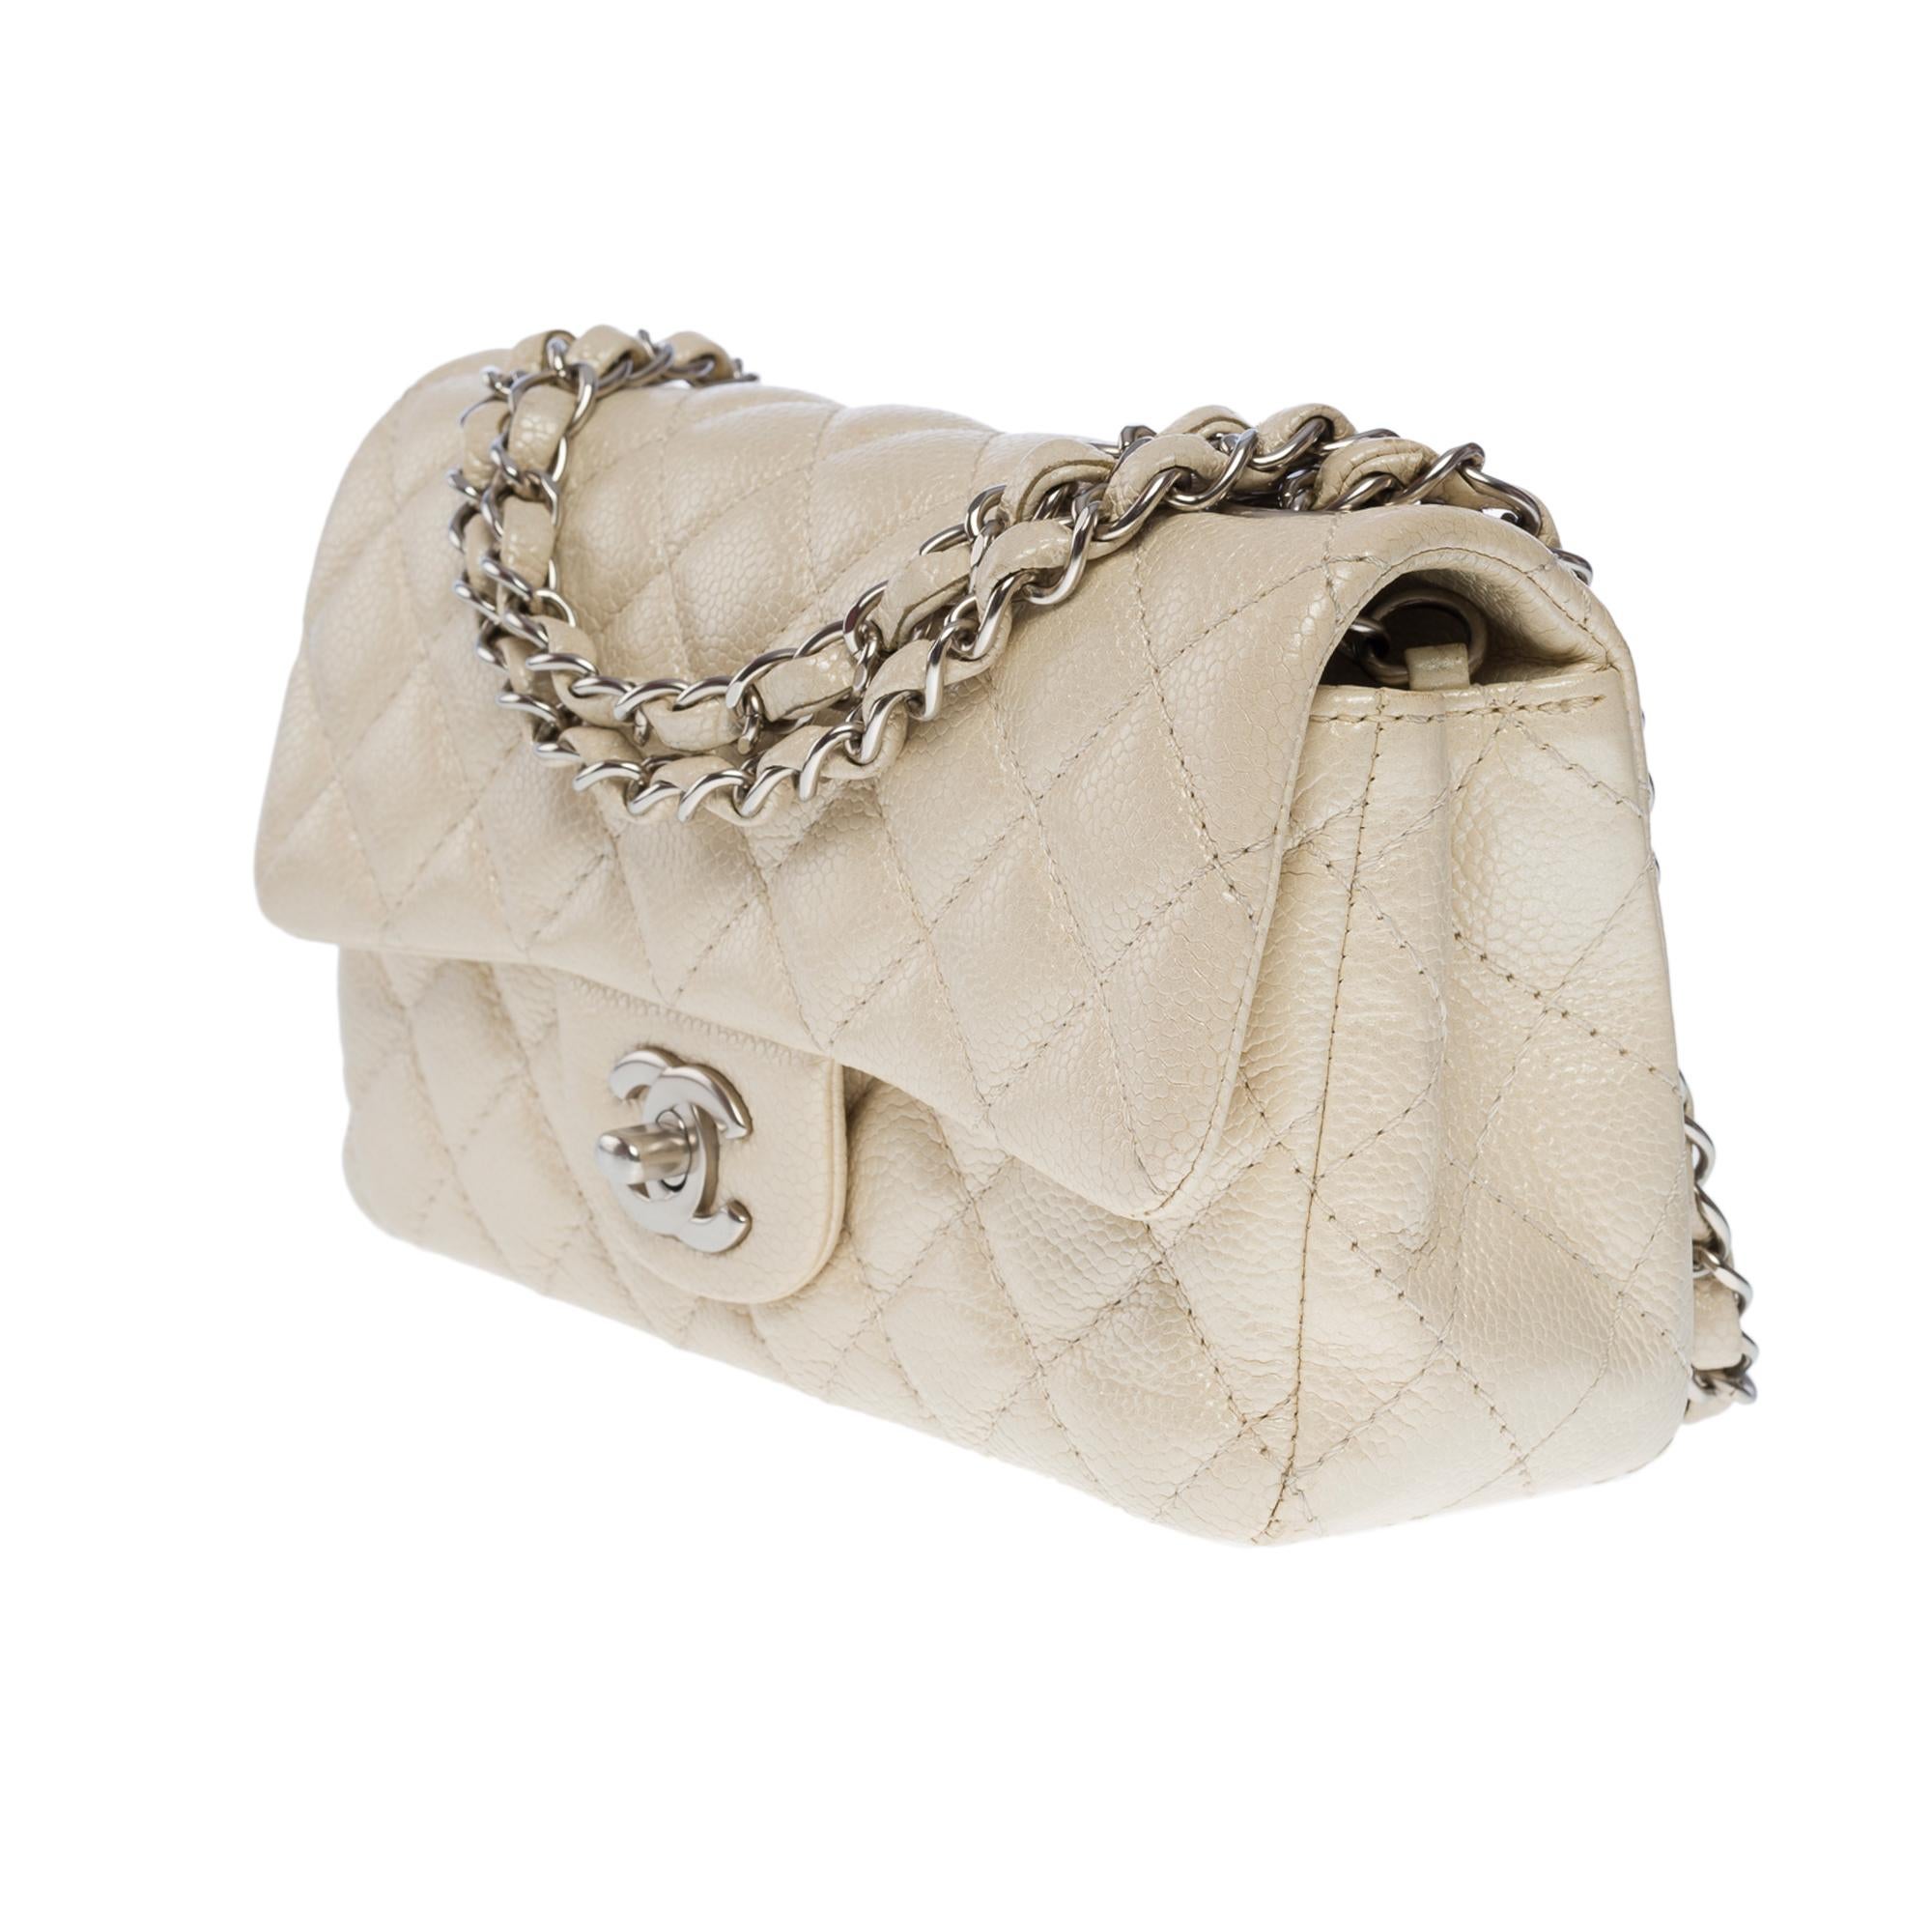 Women's Splendid Chanel Timeless Mini Flap bag in off white pearl quilted leather, SHW For Sale